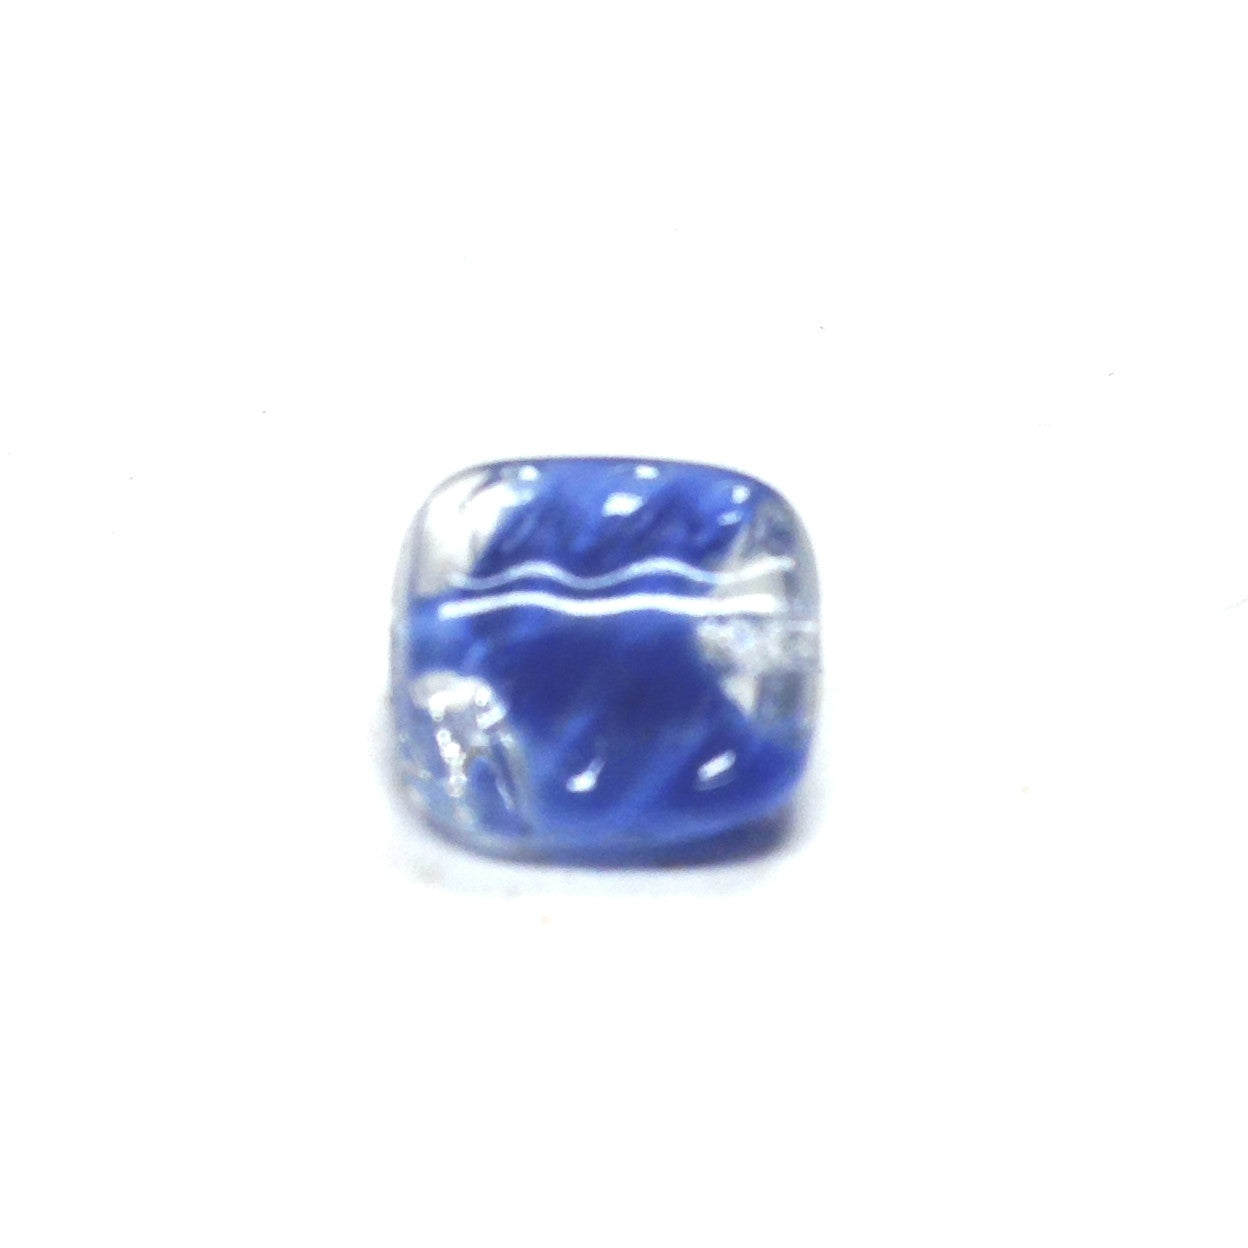 9MM Blue Glass Square Bead (144 pieces)